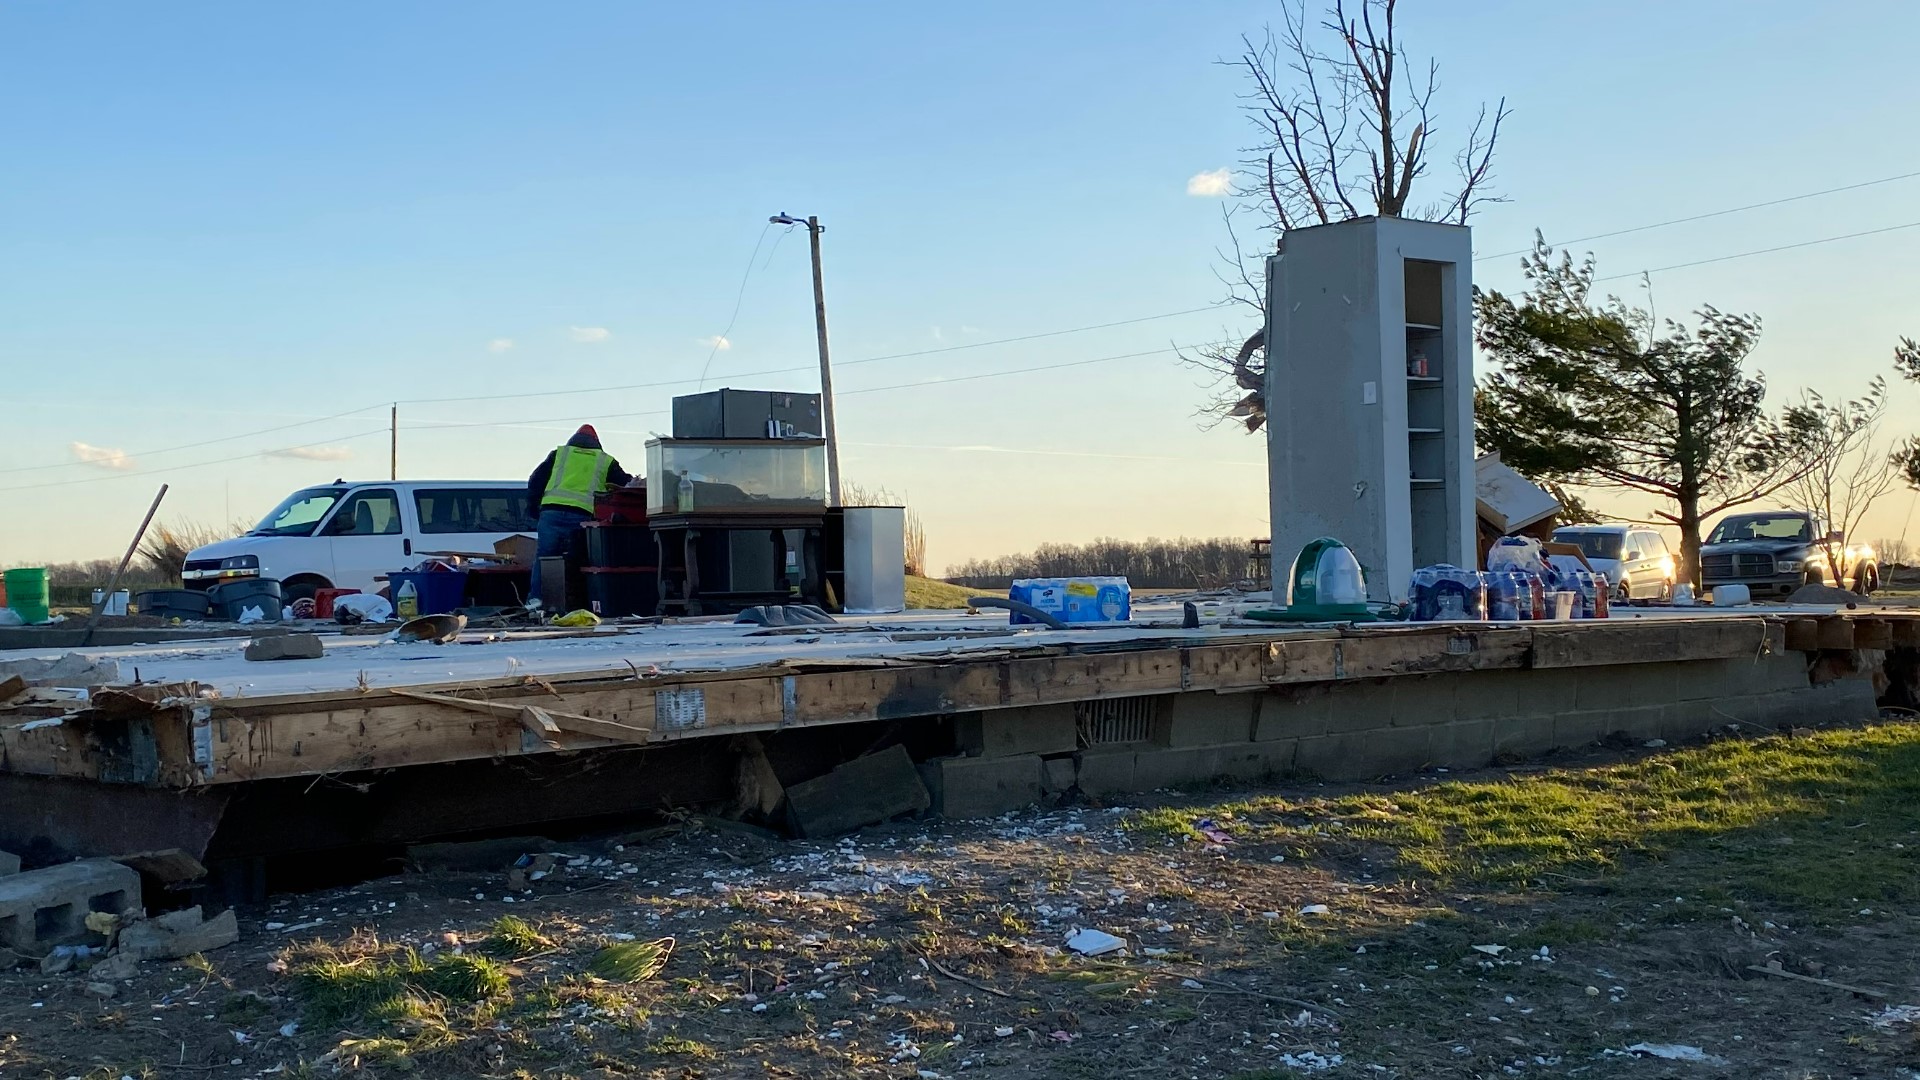 Many families in the Indian Lake community are still dealing with the aftermath of the EF3 tornado that killed three people and injured more than two dozen others.